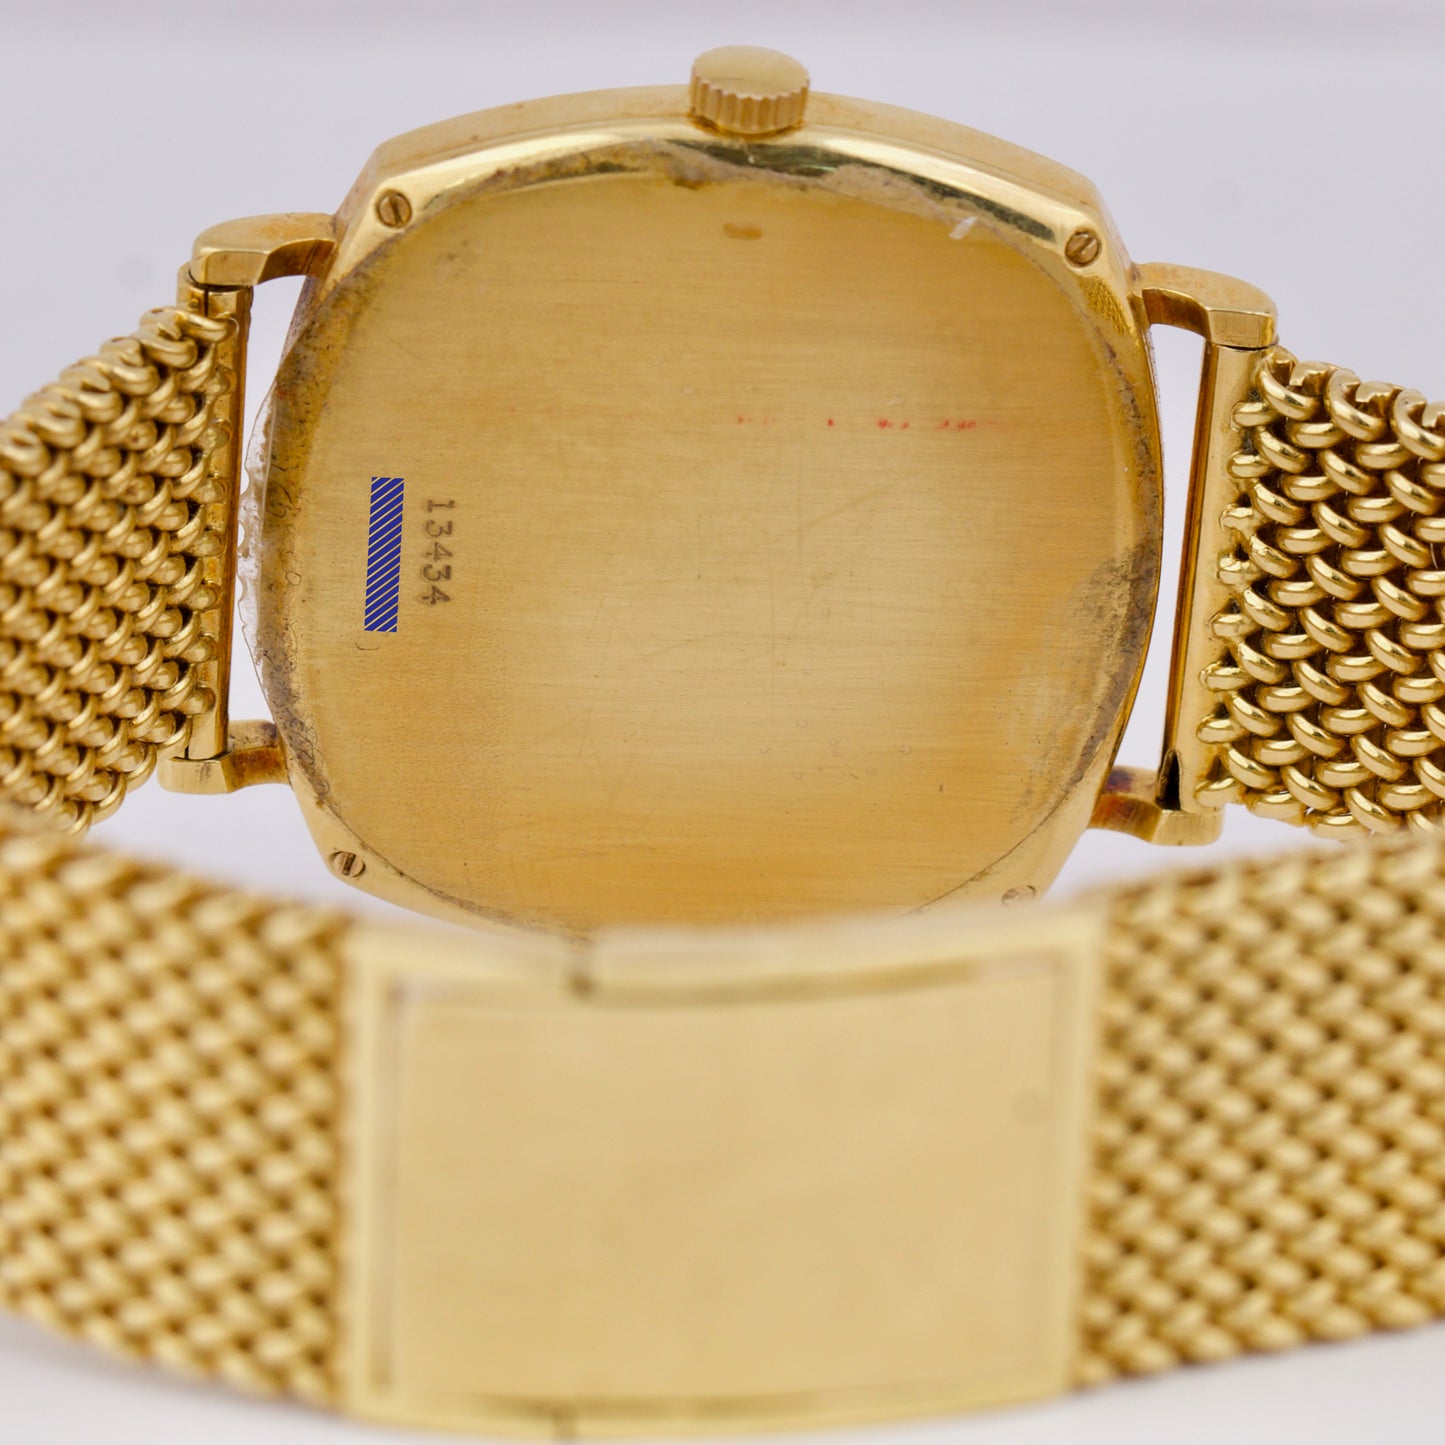 VINTAGE Piaget 18K Yellow Gold CHAMPAGNE BARK 32mm Automatic Roman Watch 13434